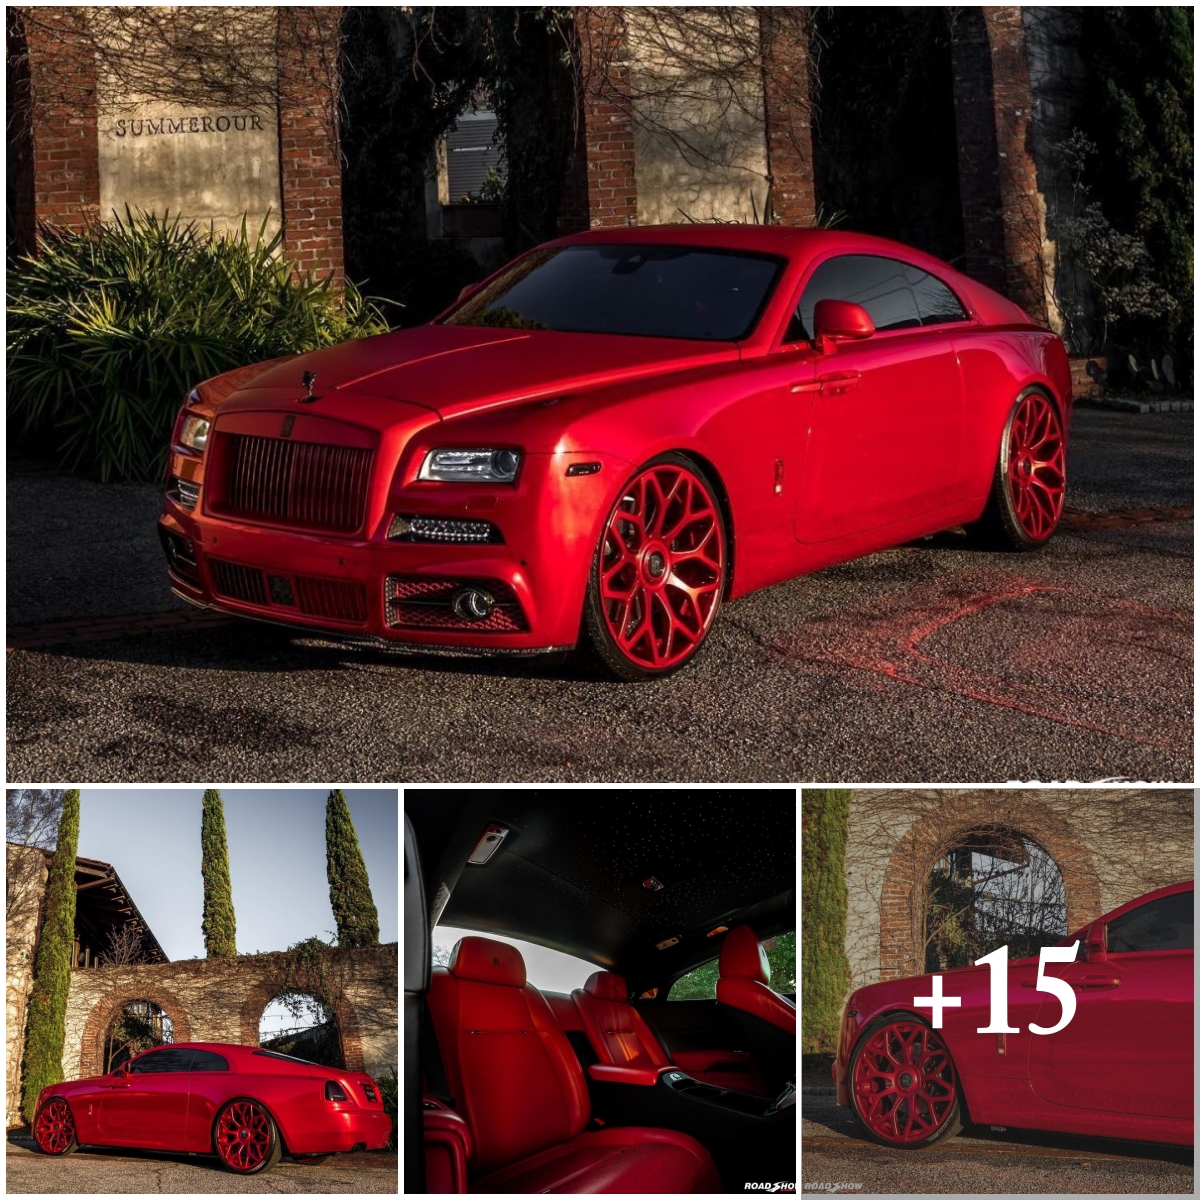 Mansory’s Striking “Vibrant Red” Rolls-Royce Wraith Takes the Stage